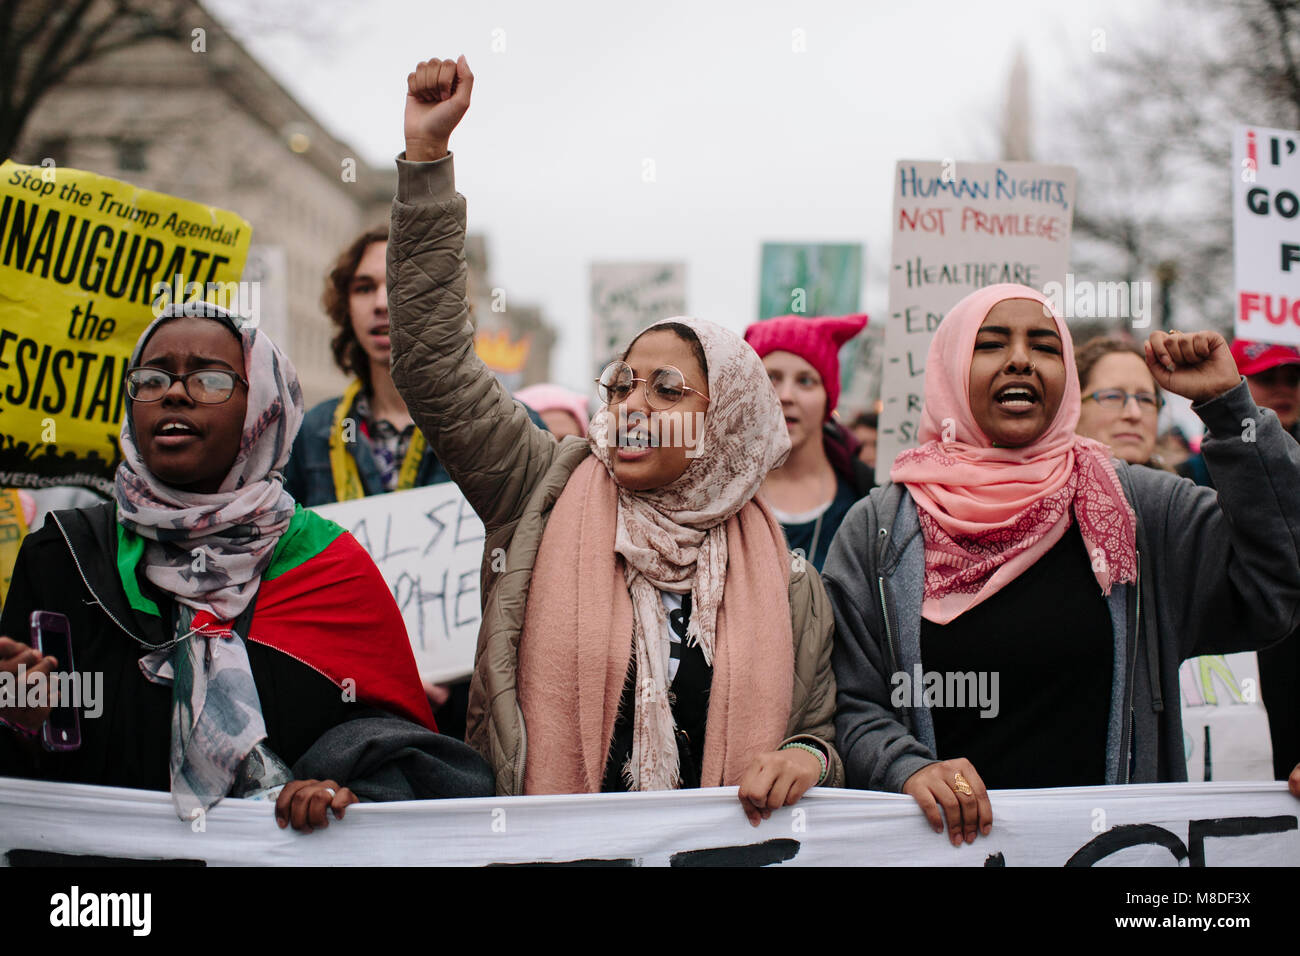 Protestors march in the Women’s March on Washington D.C., January 21, 2017 Stock Photo